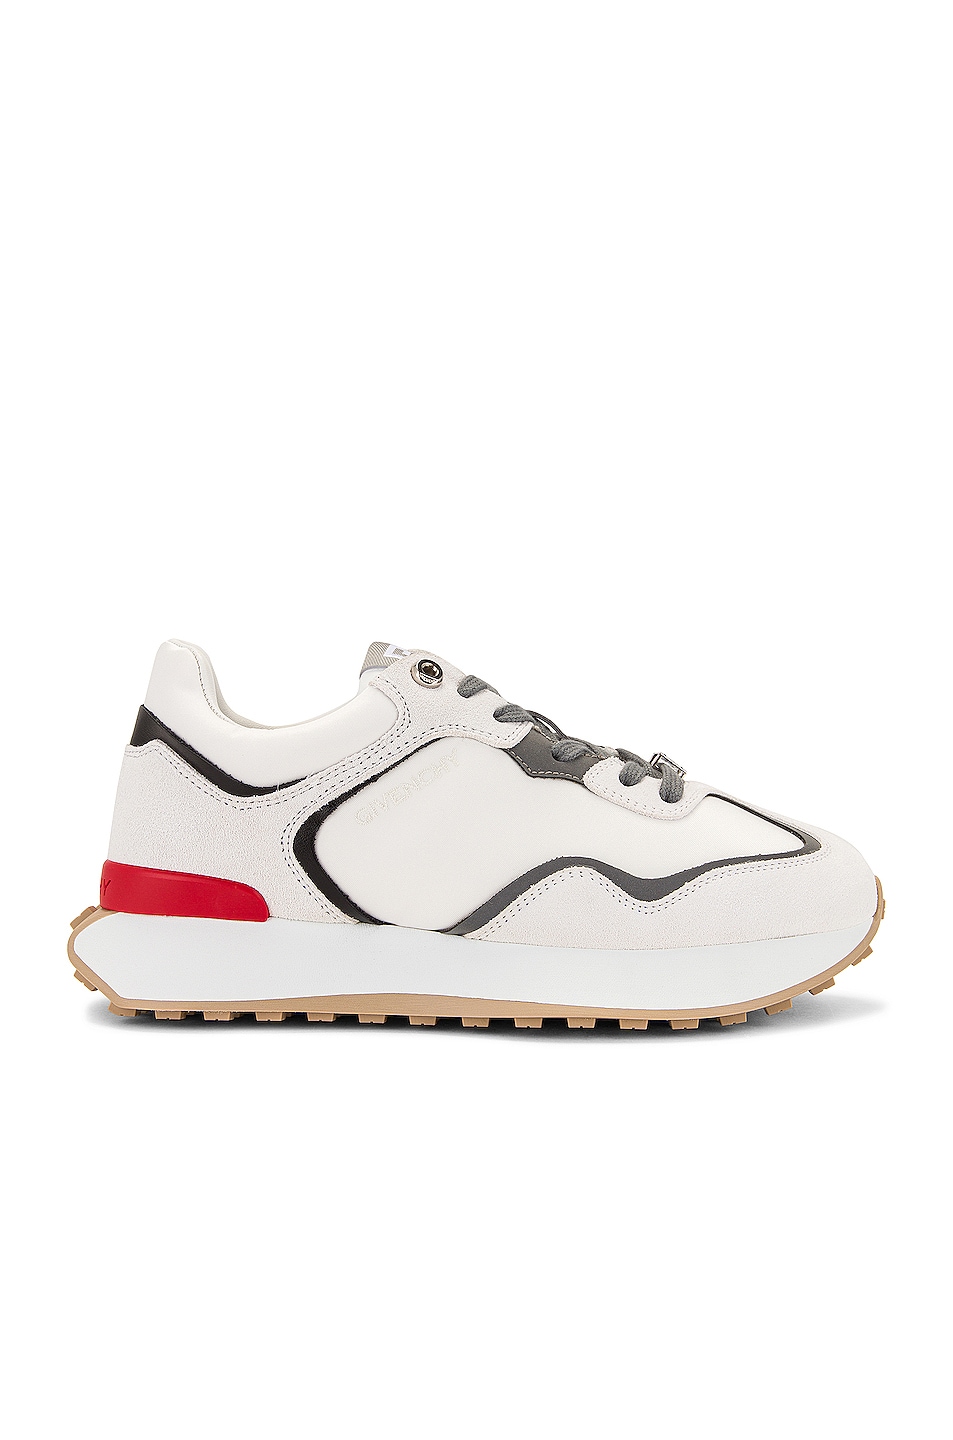 Image 1 of Givenchy GIV Runner Sneakers in Grey & White & Red